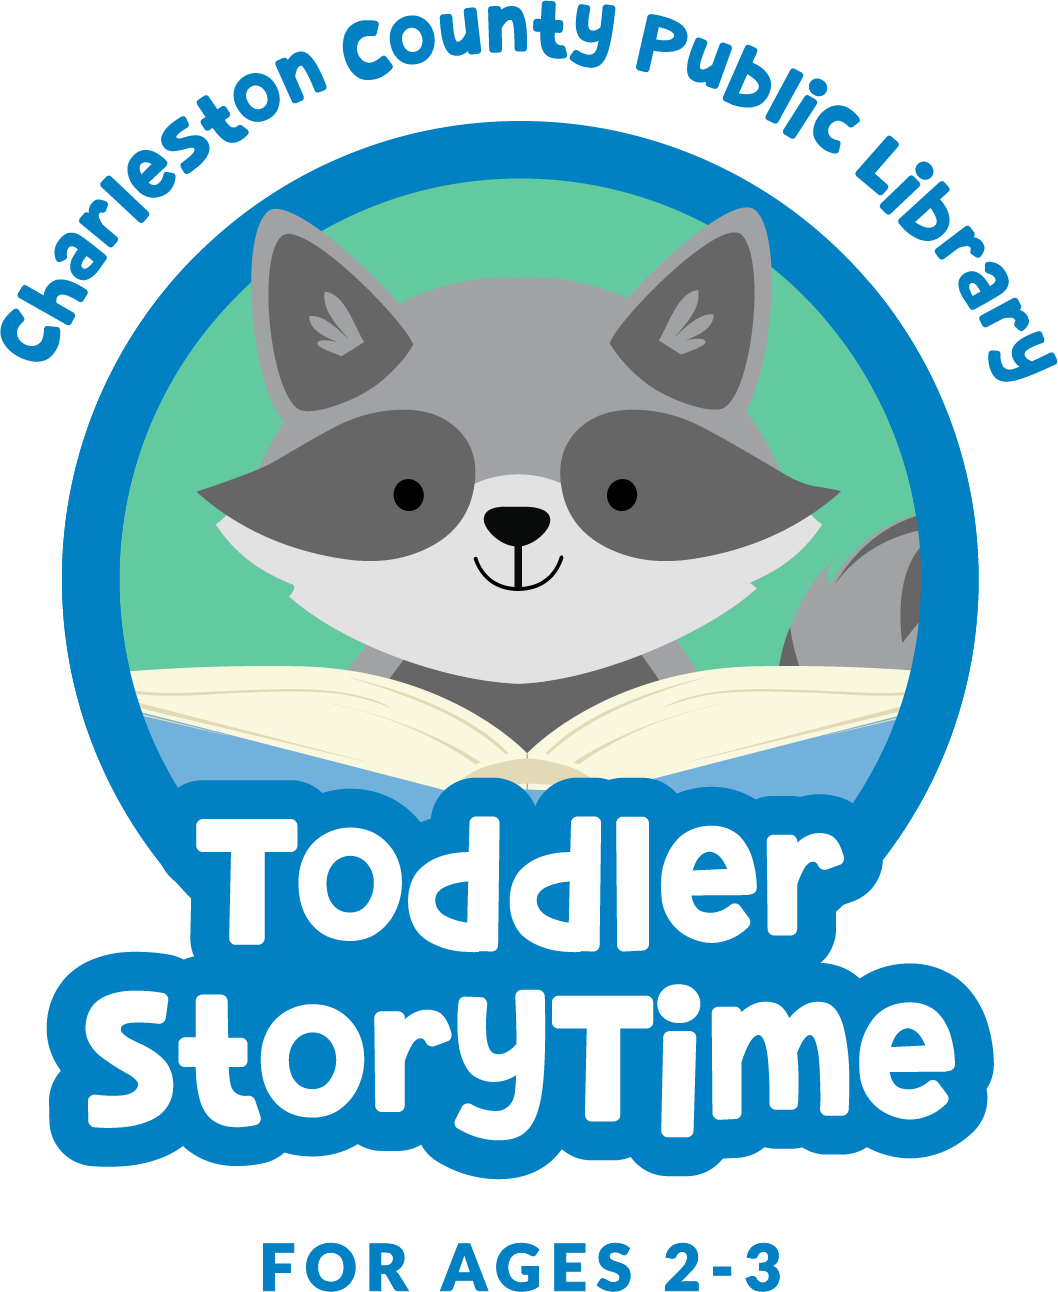 Toddler Storytime (ages 24-36 months) at Main Library